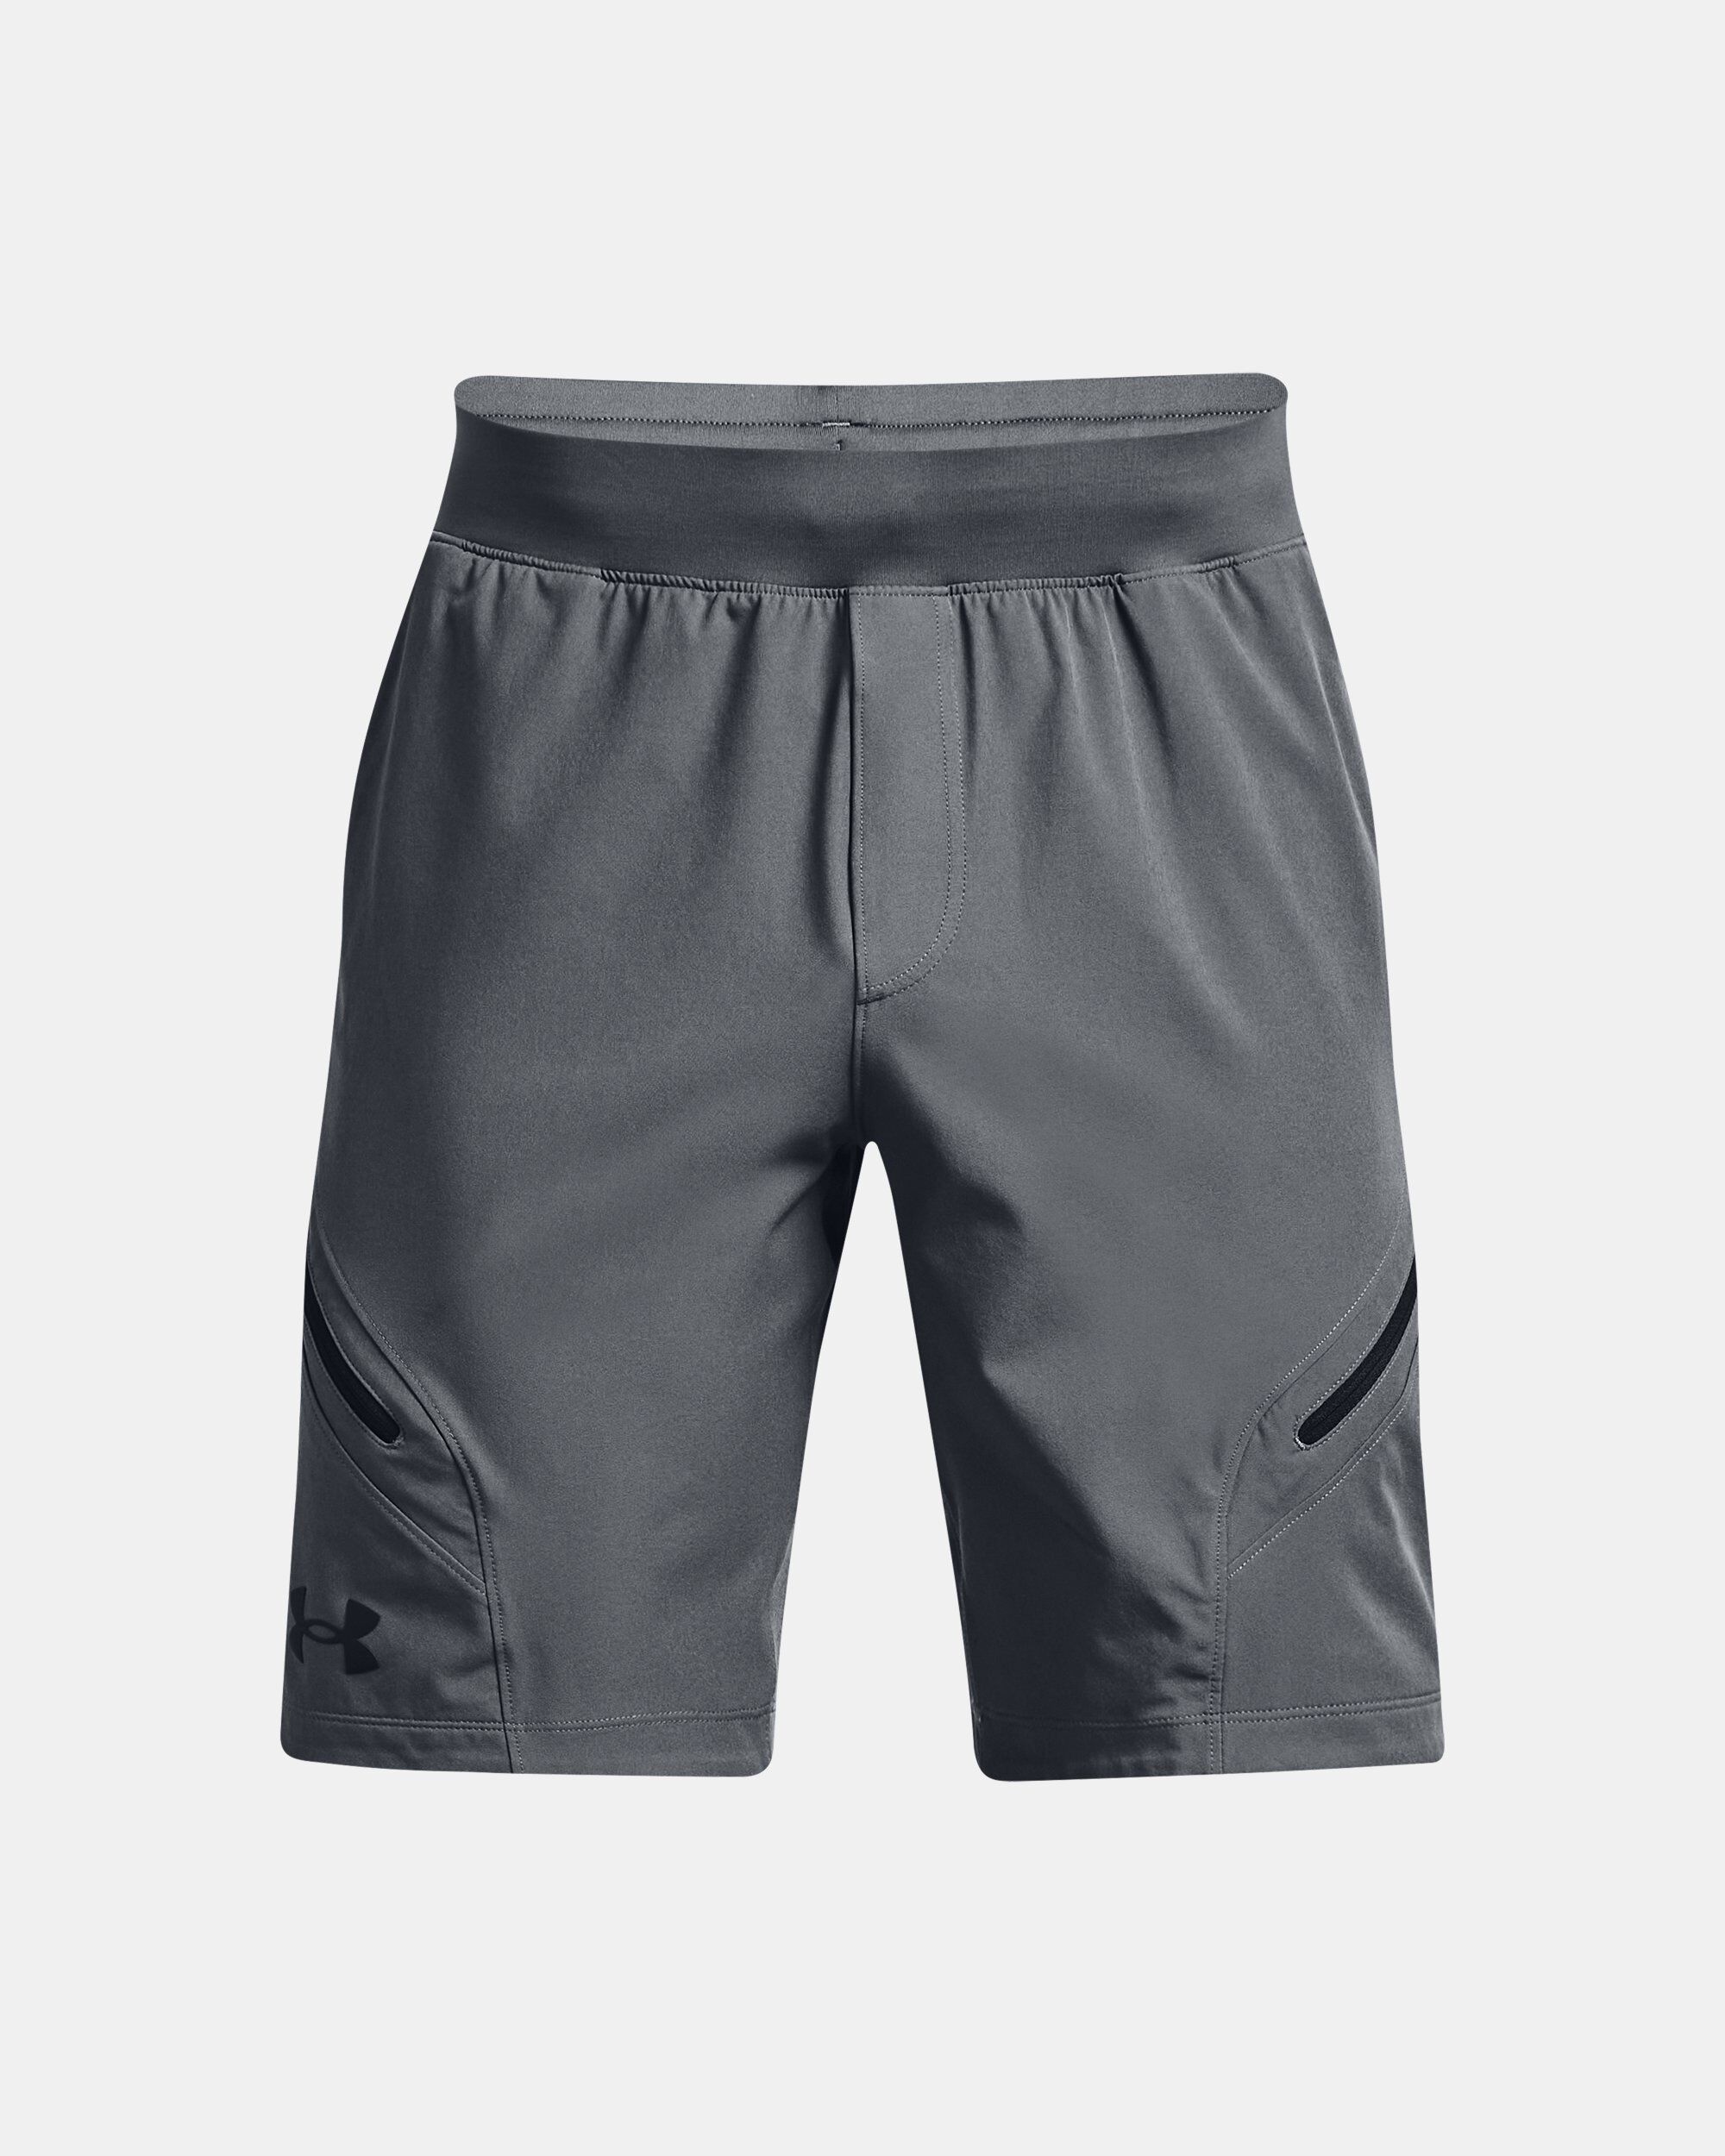 Under Armour Men's UA Unstoppable Cargo Shorts Brown in KSA